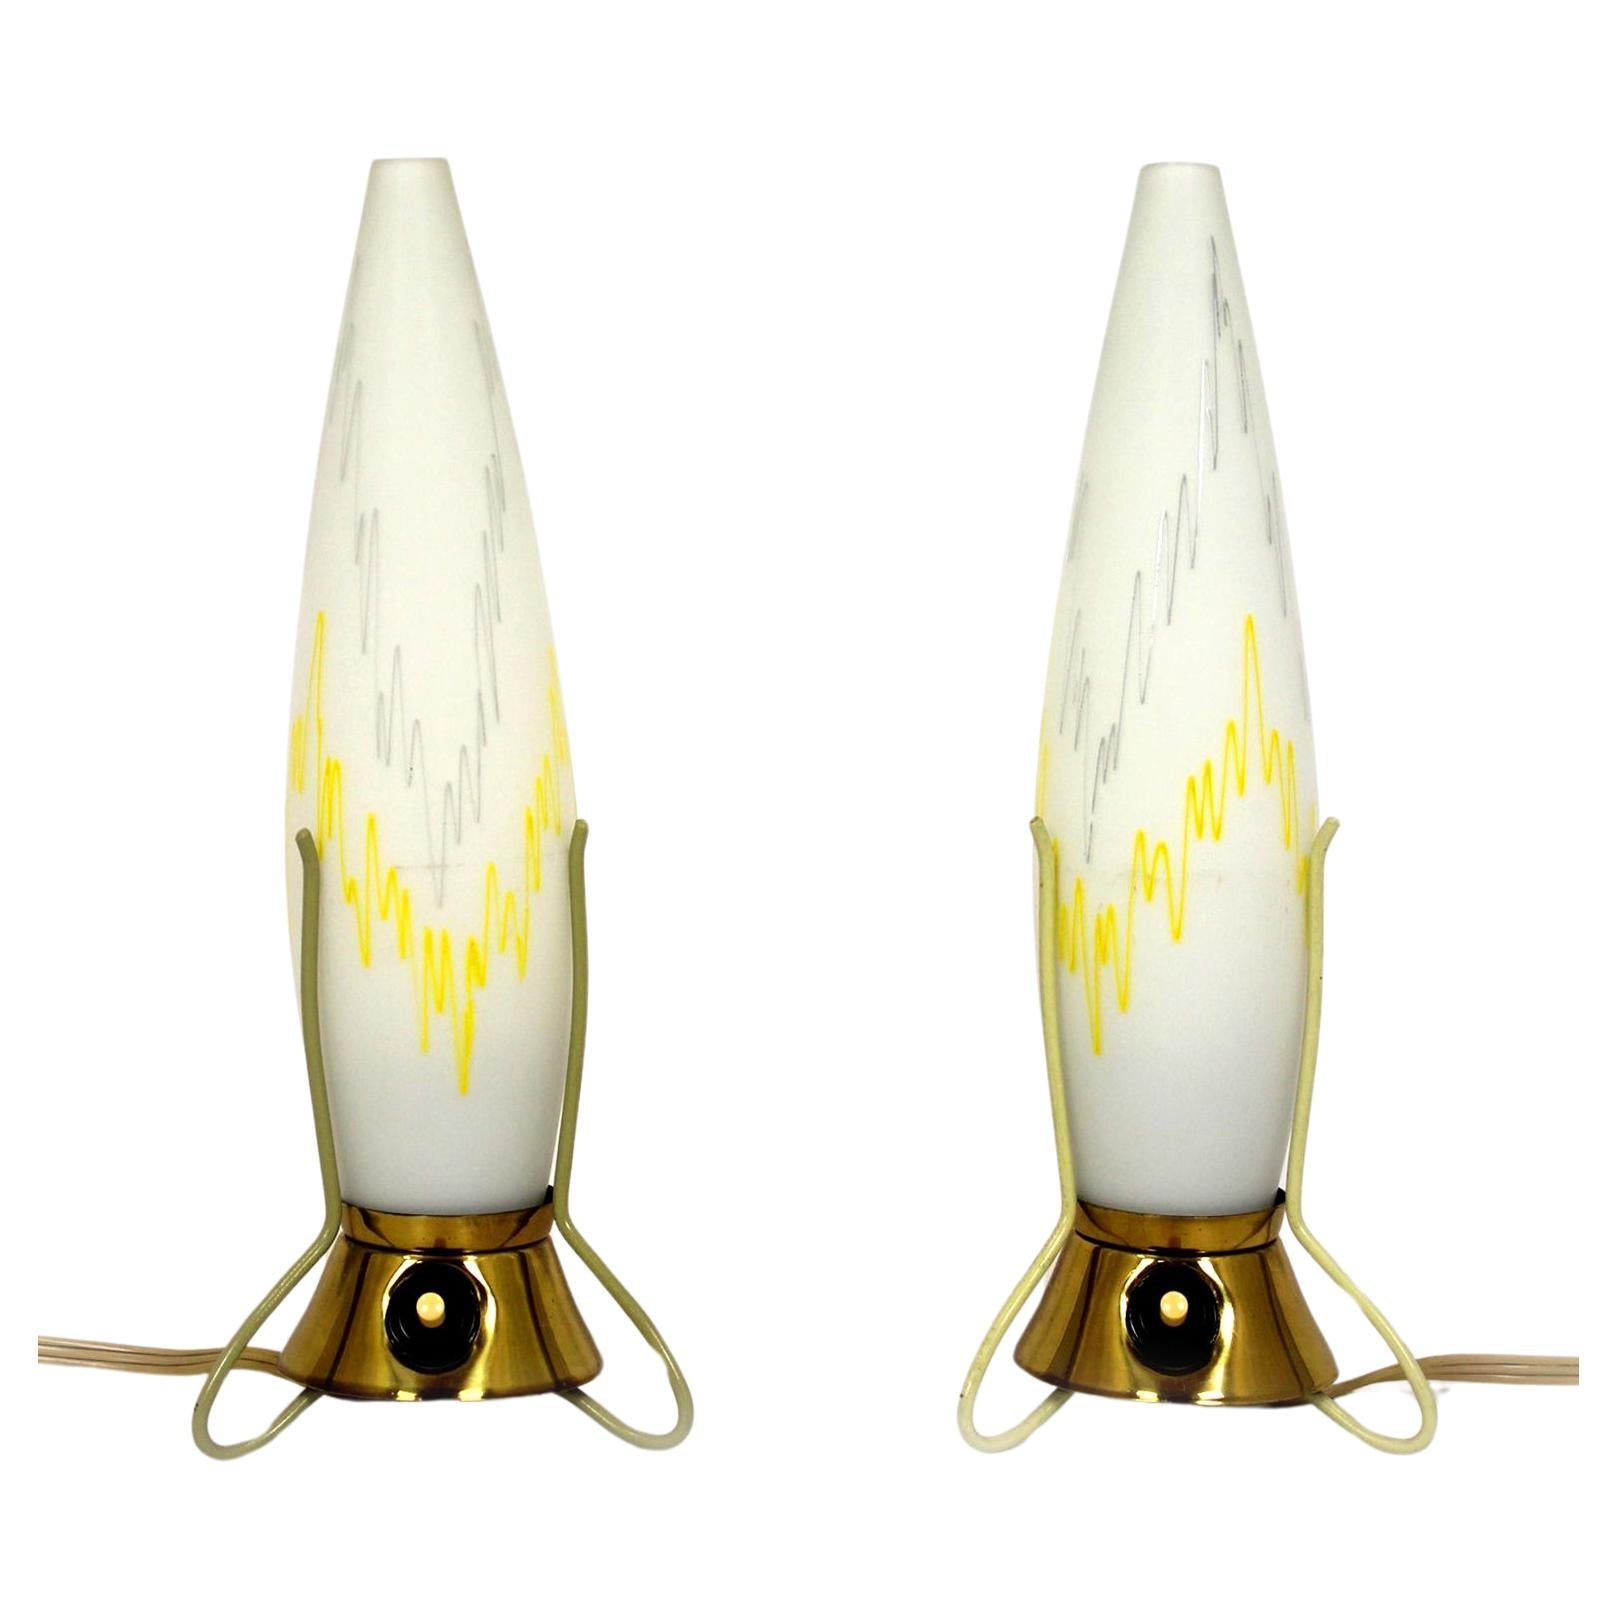 Space Age Rocket Table Lamps by Zukov, 1960s, Set of 2 For Sale